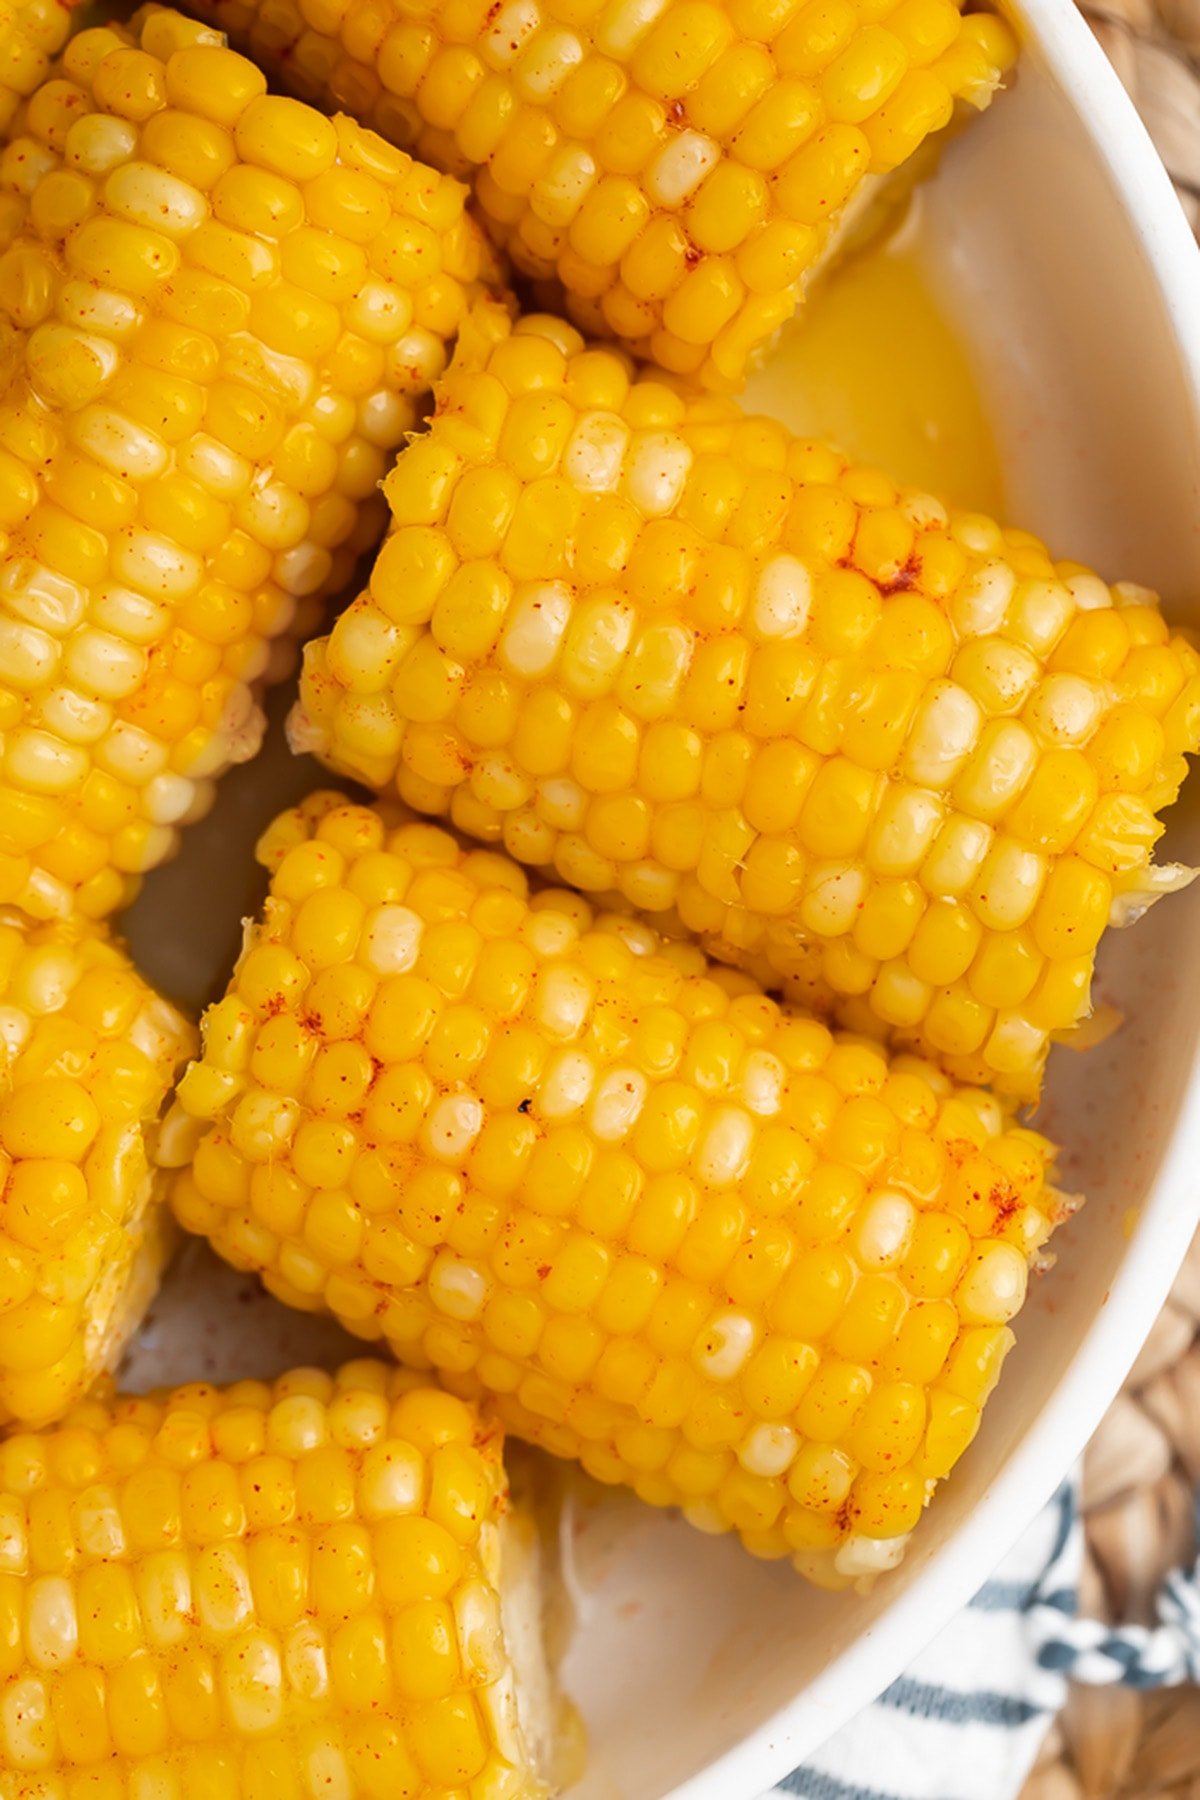 Instant Pot corn on the cob with a honey butter glaze in a large white bowl on a wicker placemat.